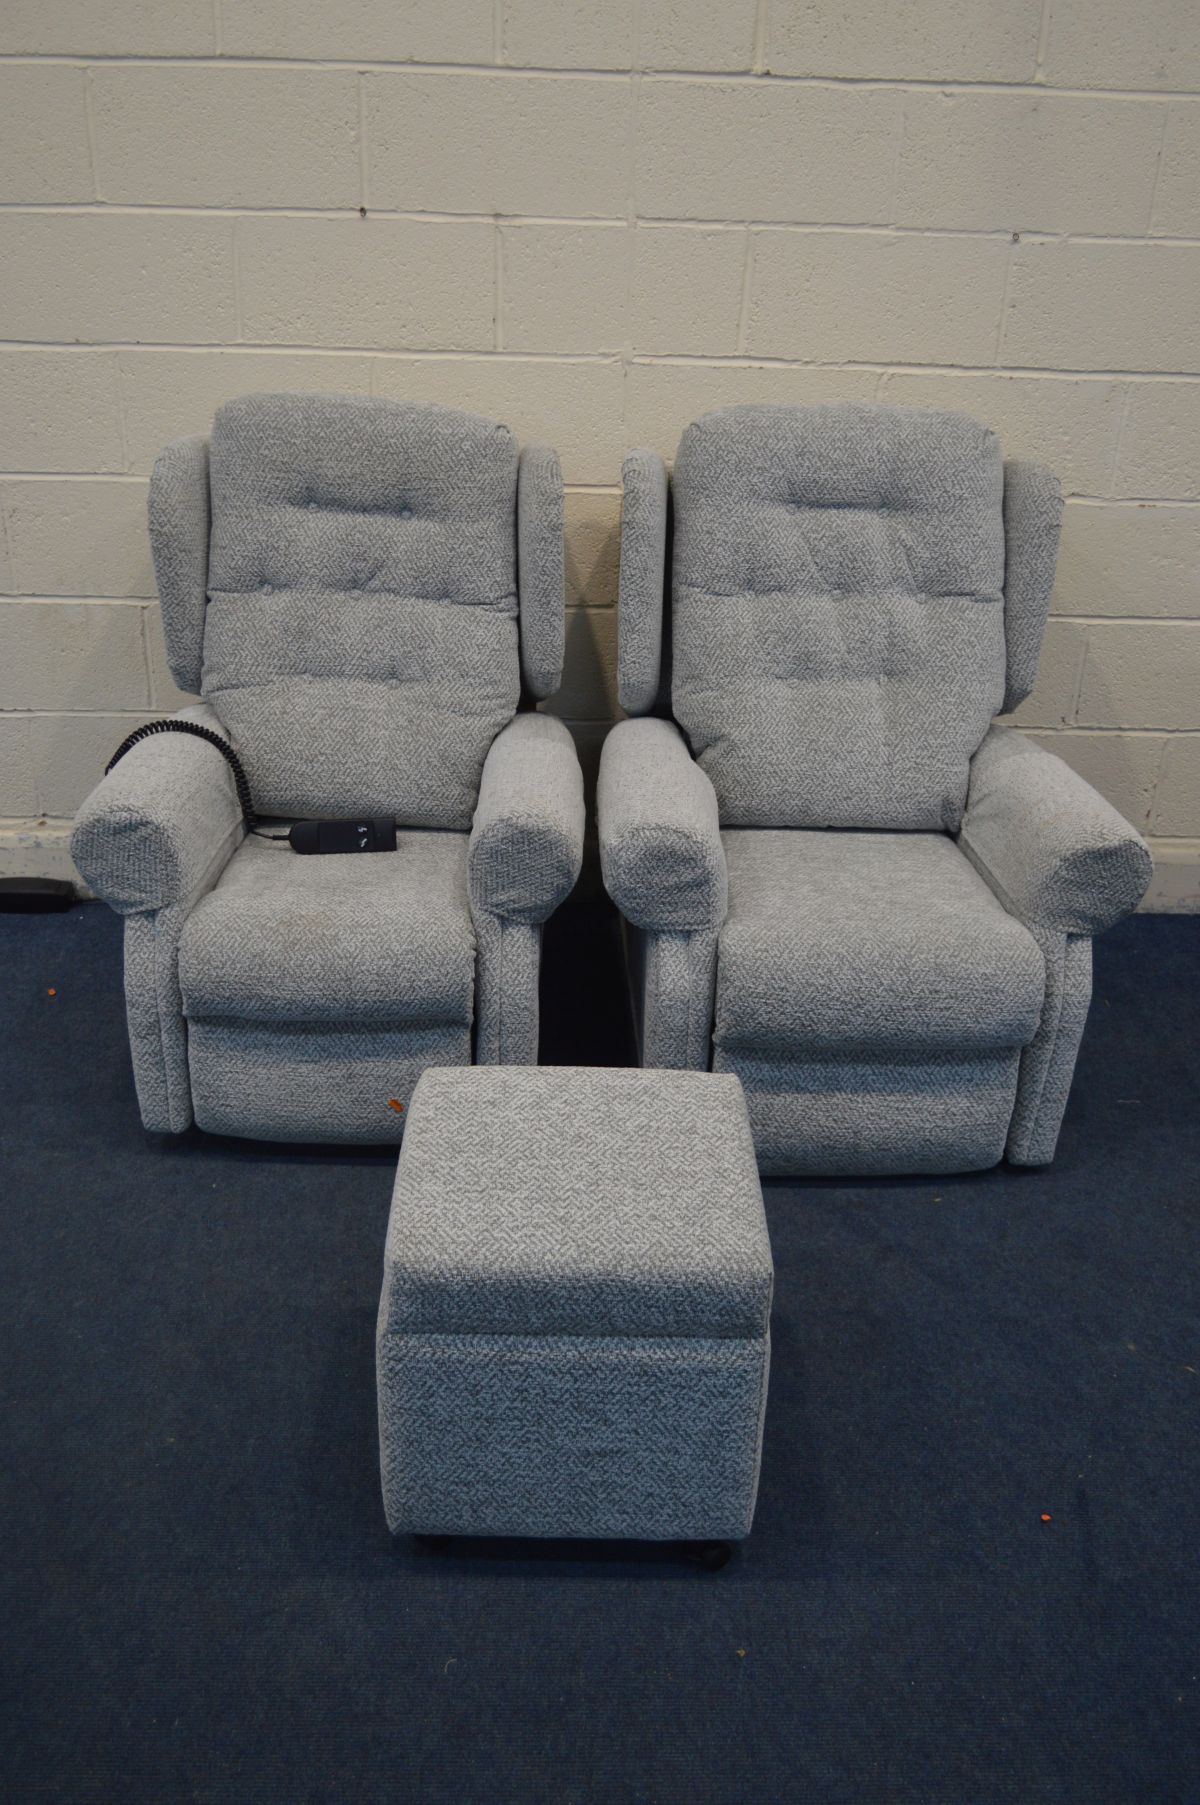 A PRIMACARE PATTERNED GREY UPHOLSTERED ELECTRIC RISE AND RECLINE ARMCHAIR (PAT pass and working) a